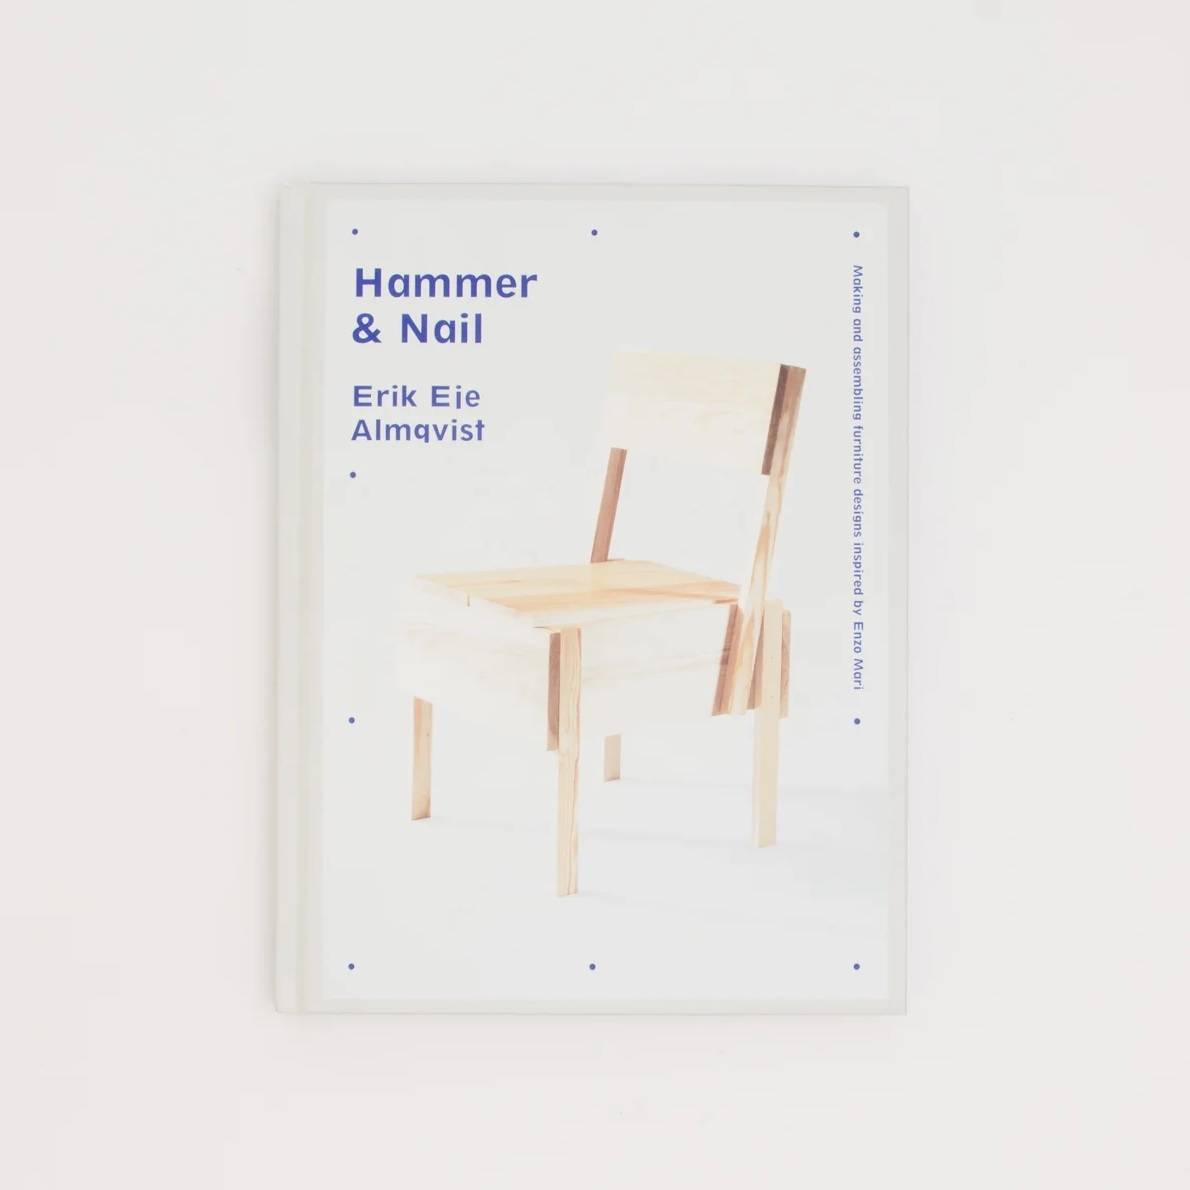 Hammer and nail book frontcover